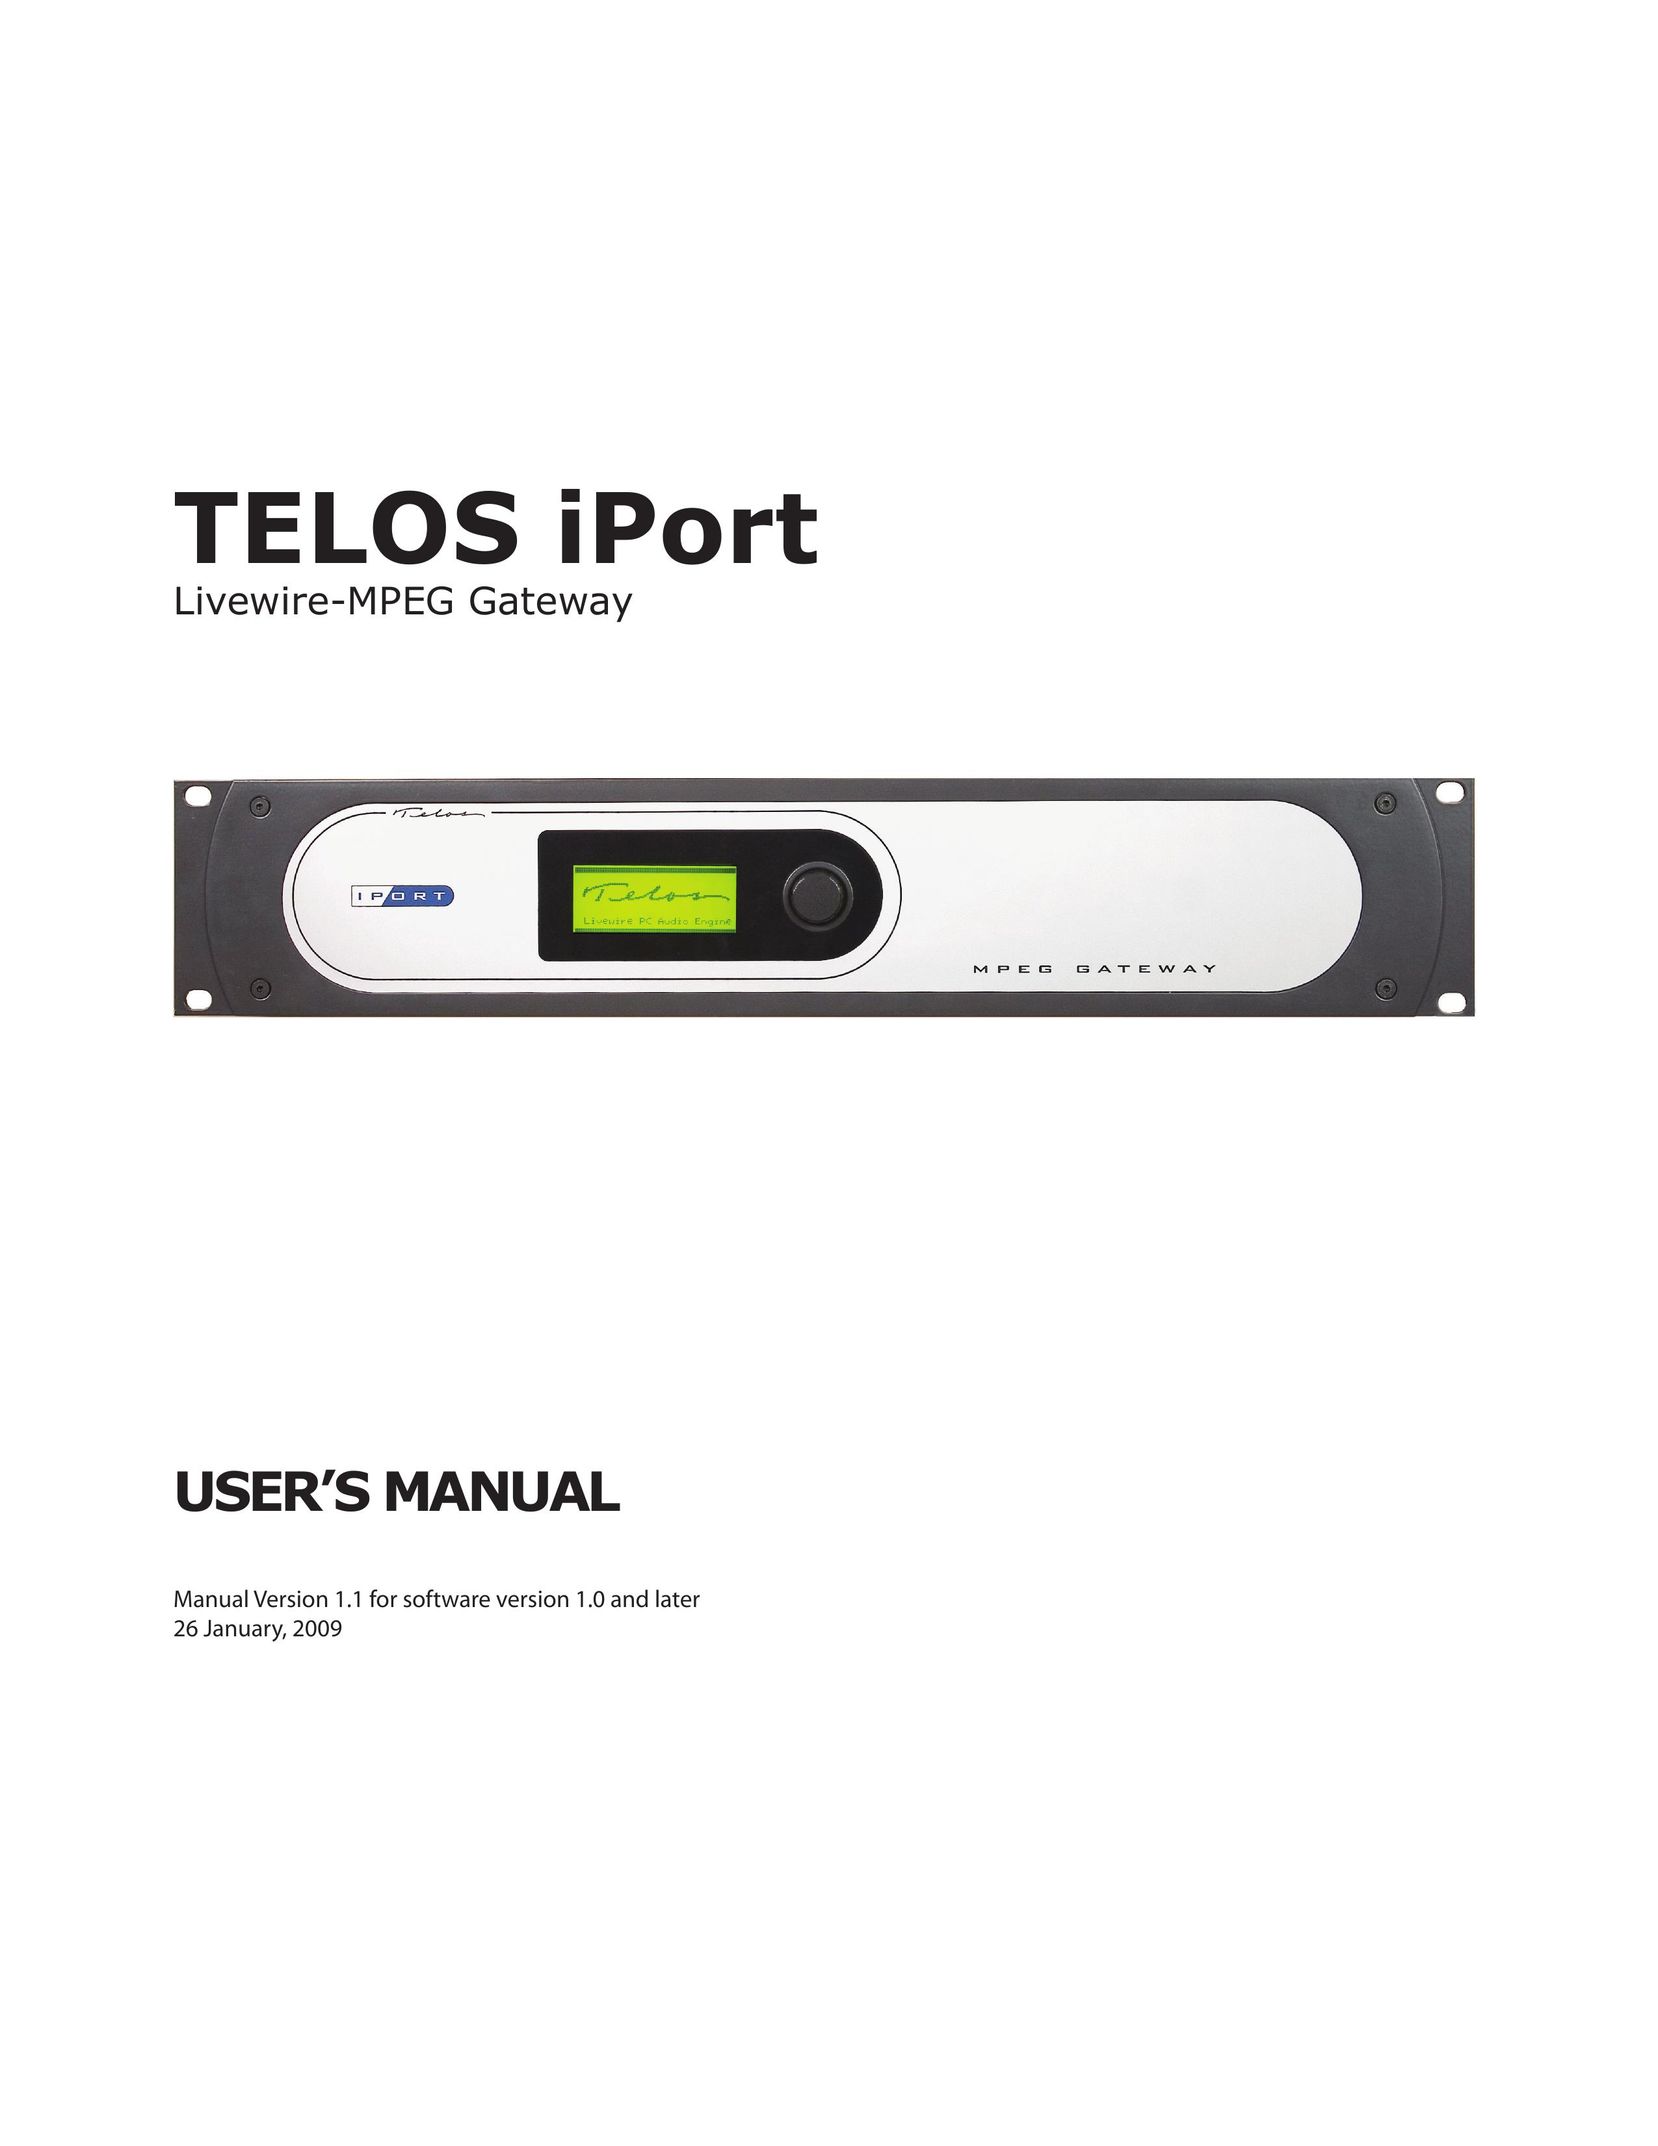 Telos iPort Network Router User Manual